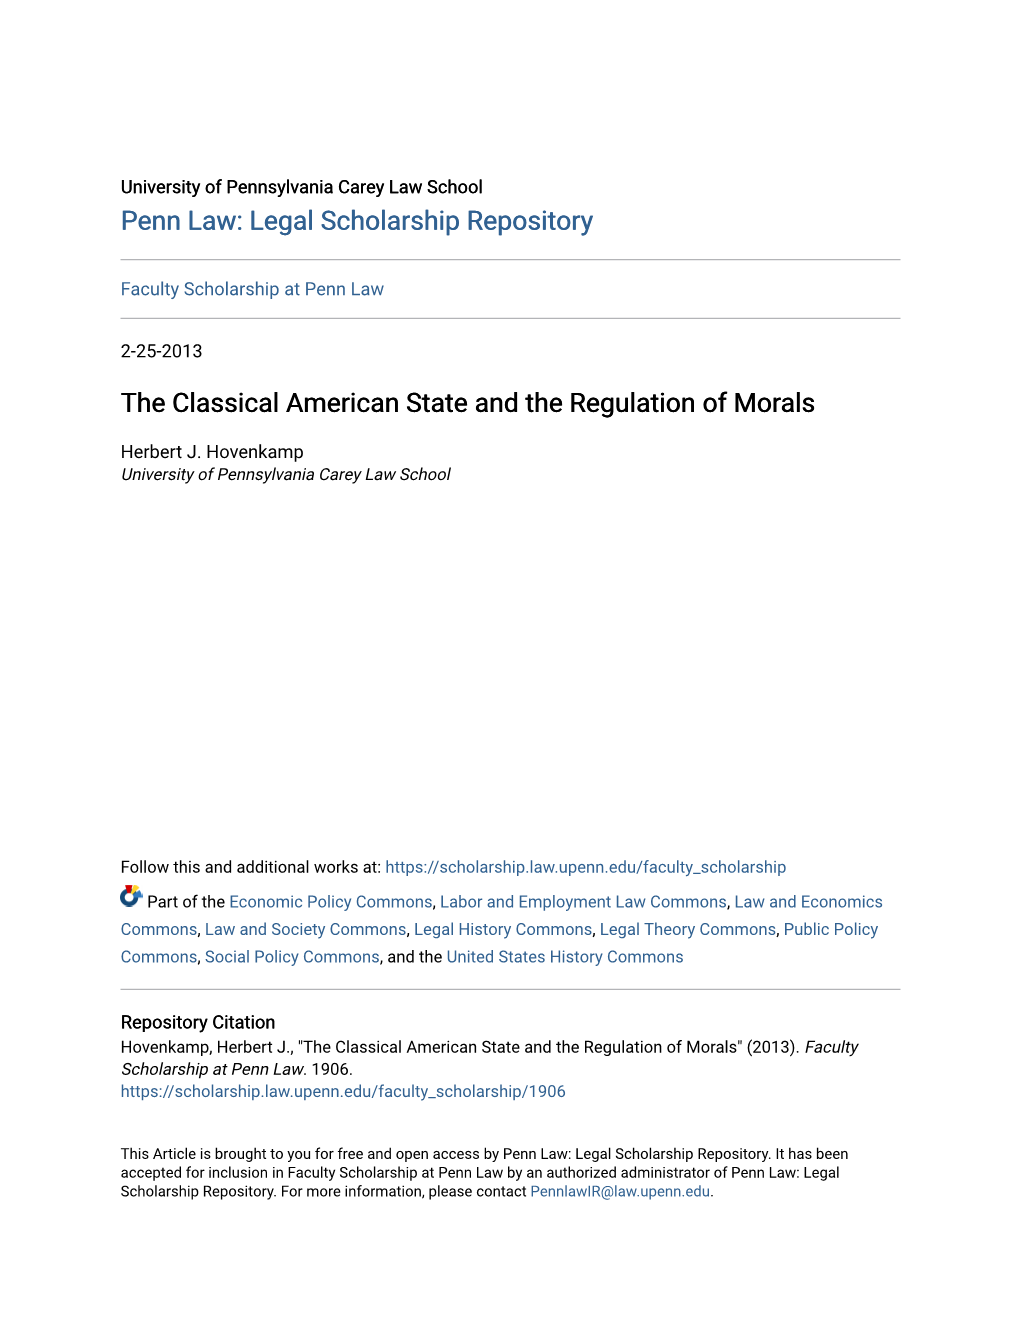 The Classical American State and the Regulation of Morals